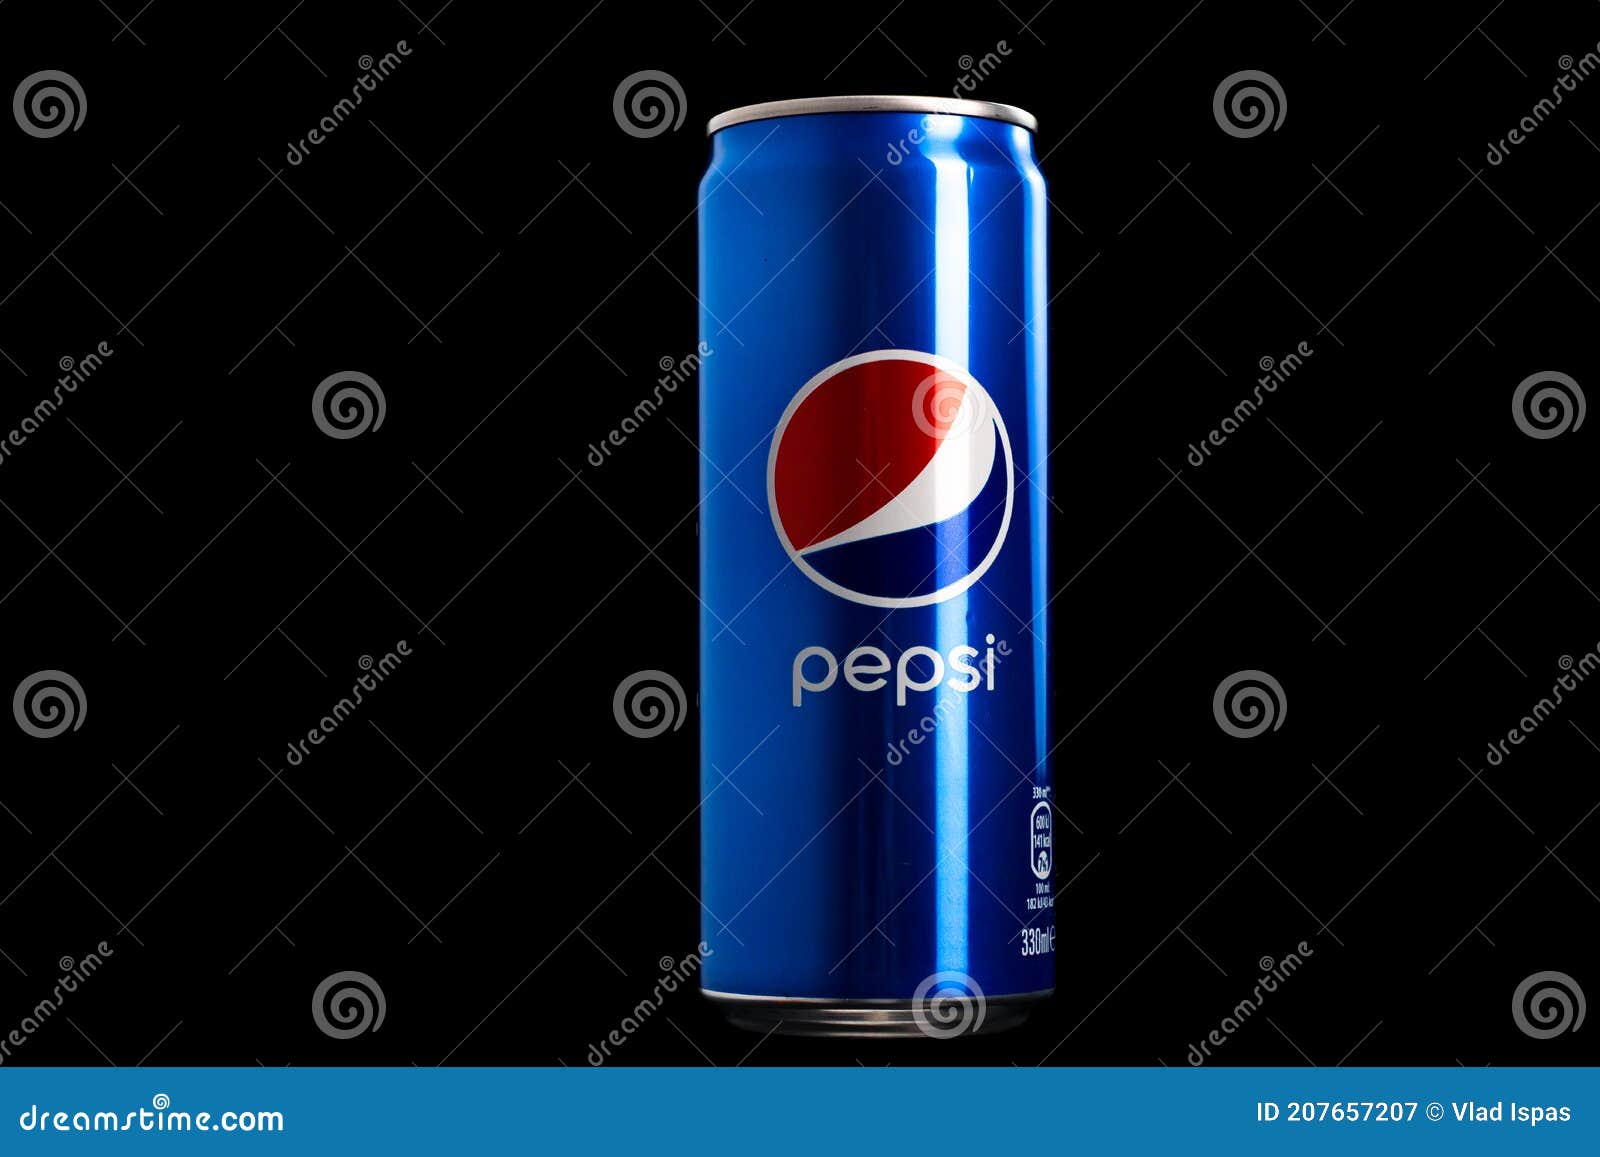 Editorial Photo of Classic Pepsi Can on Black Background. Studio Shot ...